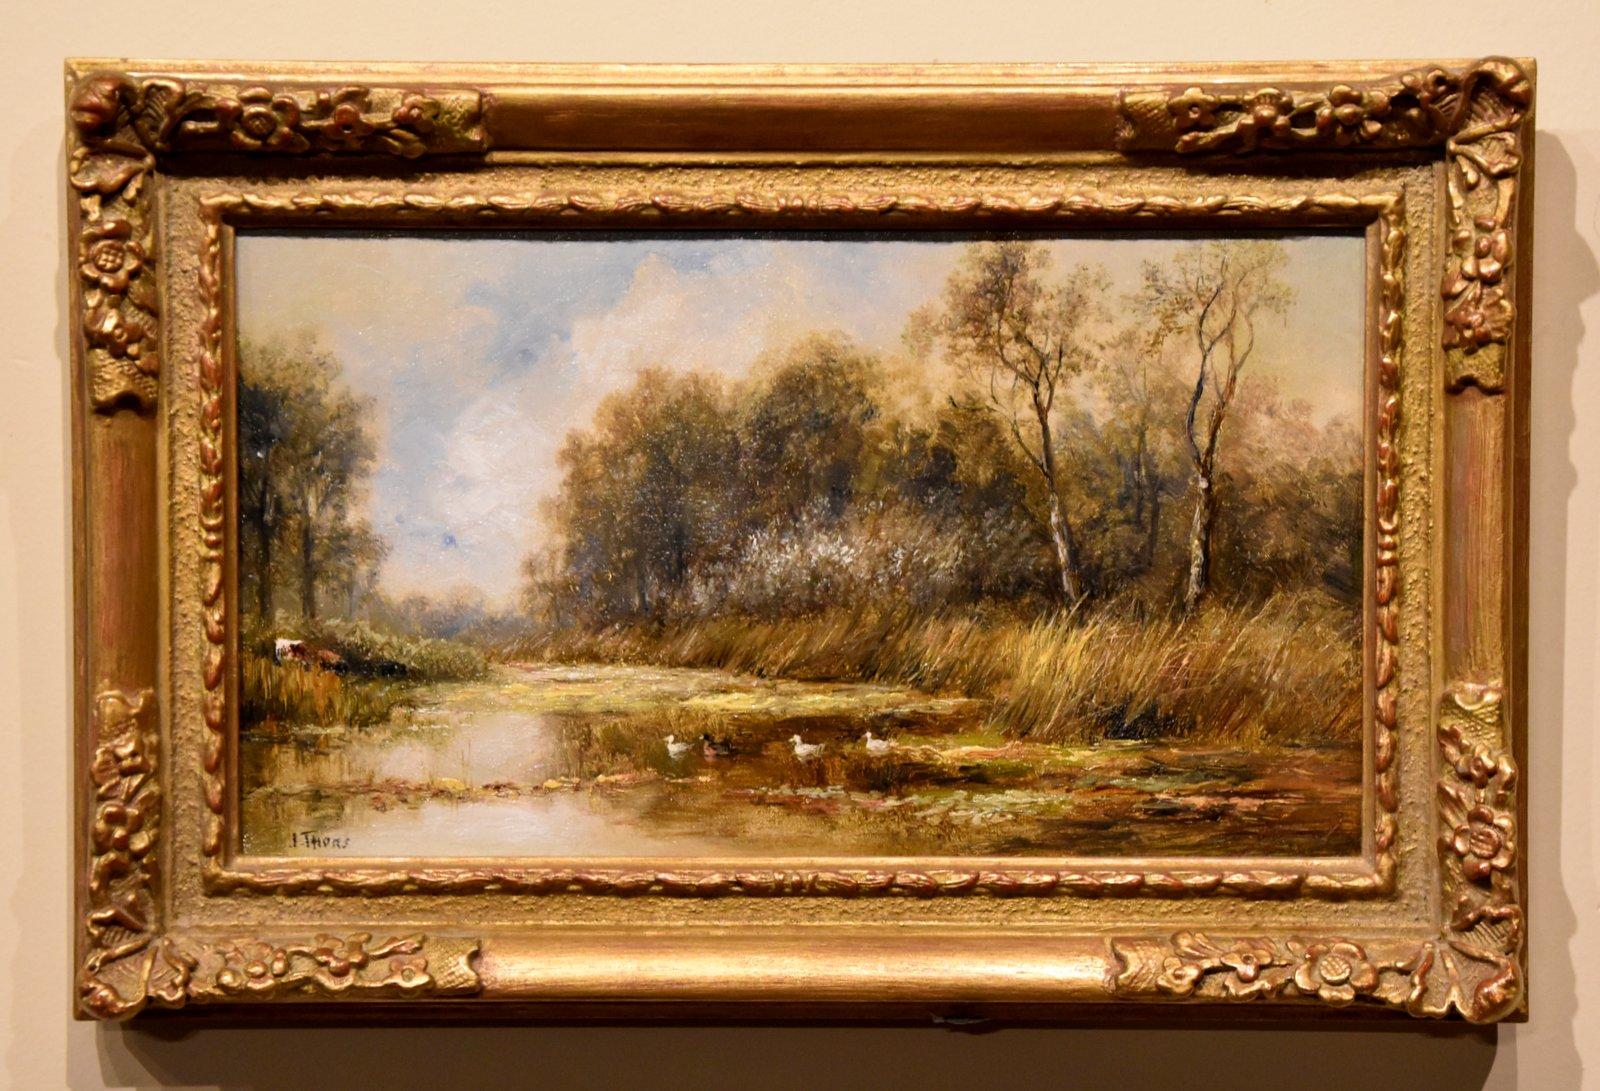 Oil Painting by Joseph Thors "A Quiet day by the River"  1843- 1907 Popular painter of rural landscapes and regular exhibitor at the Royal Academy RBA, BI. Both Oil on canvas. Signed

Dimensions unframed 7  x 12 inches
Dimensions framed 10 x 15